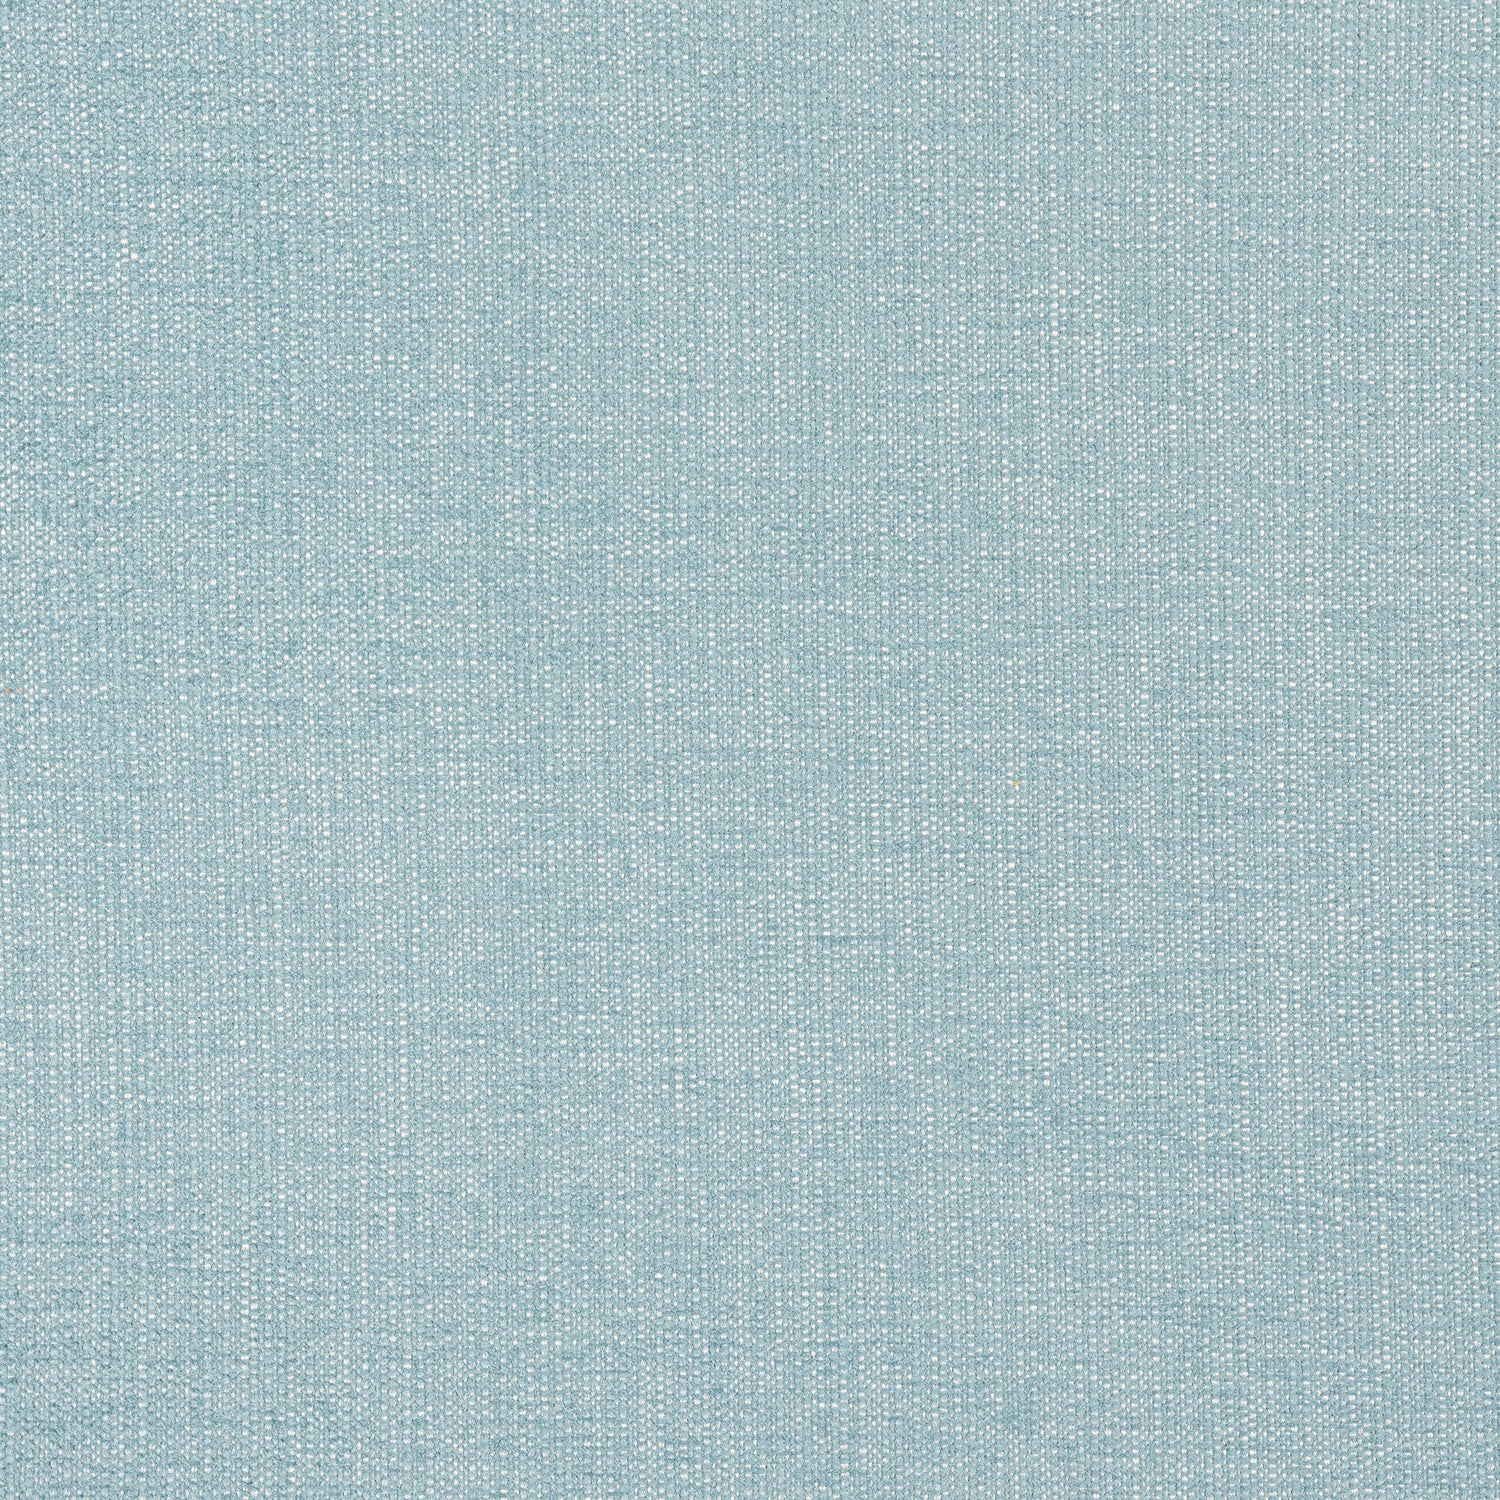 Veda fabric in seaglass color - pattern number W8720 - by Thibaut in the Haven Textures collection